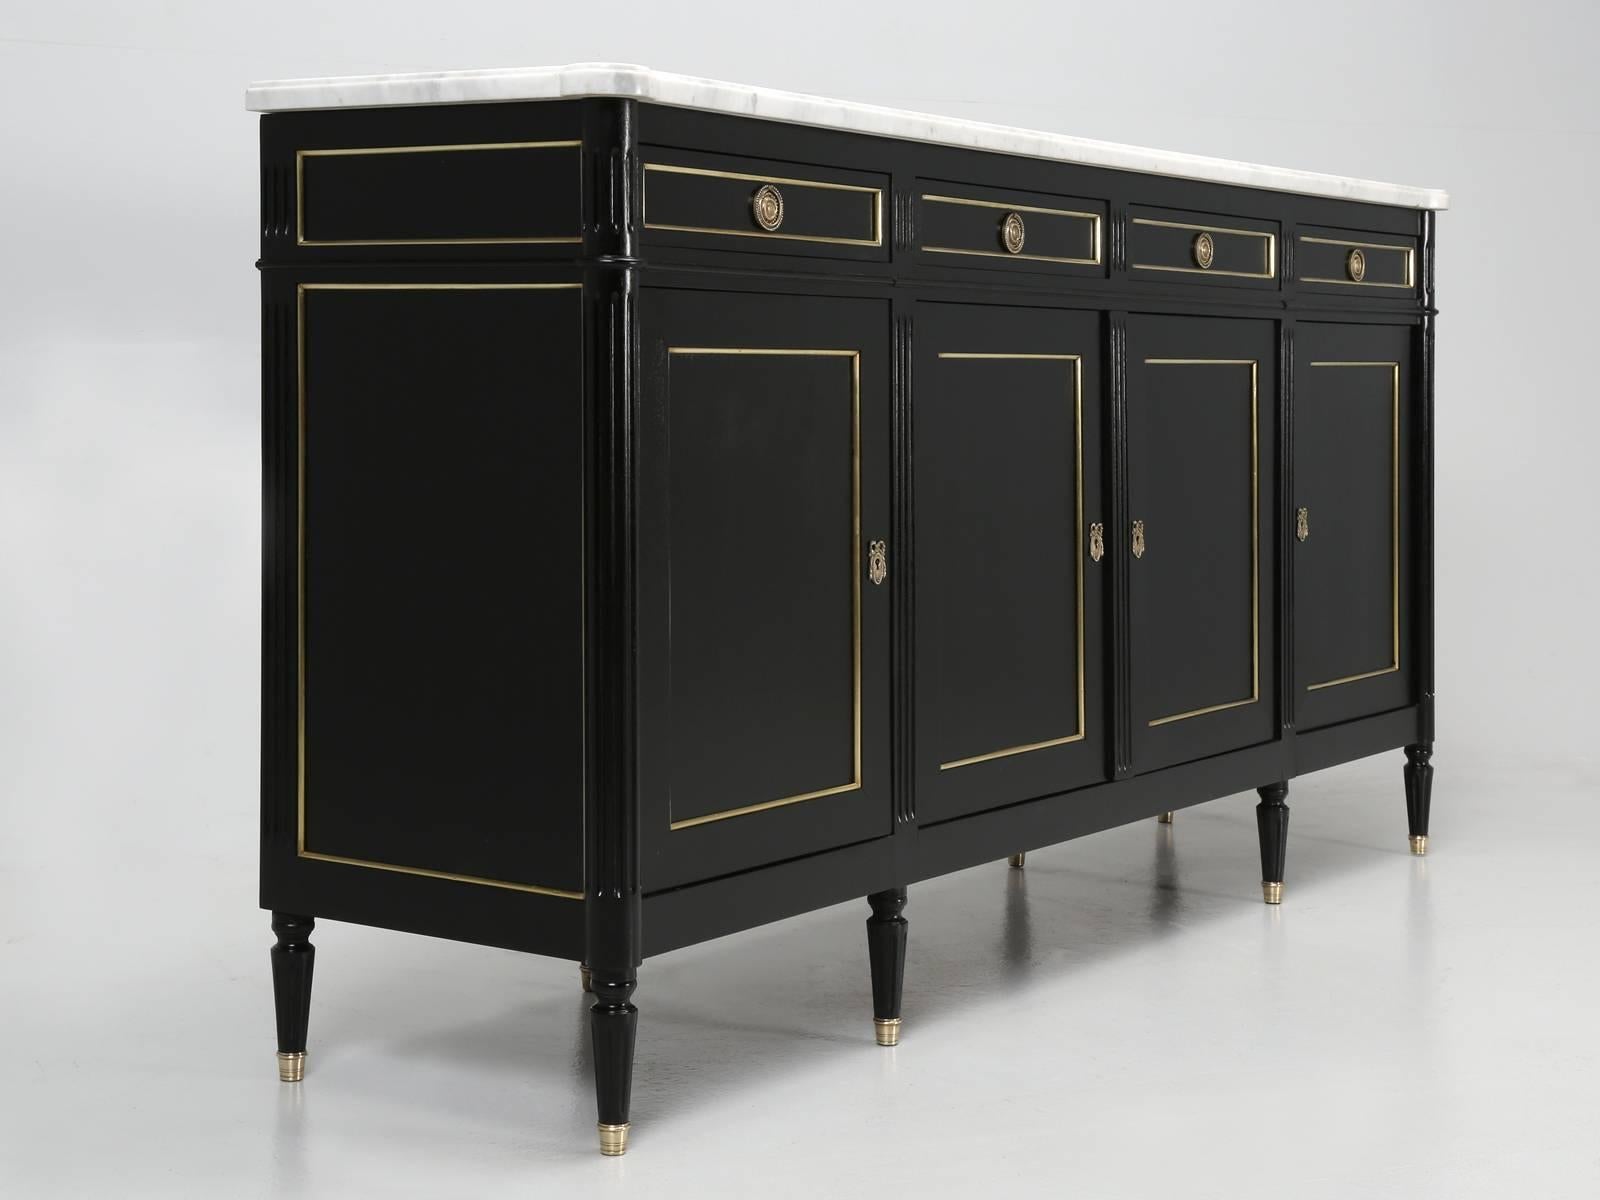 French Louis XVI style buffet that was constructed a little nicer than most, with having solid wood drawer bottoms, while more are thin plywood. The drawers of this Louis XVI style buffet are dove-tailed front and rear, which is another indication